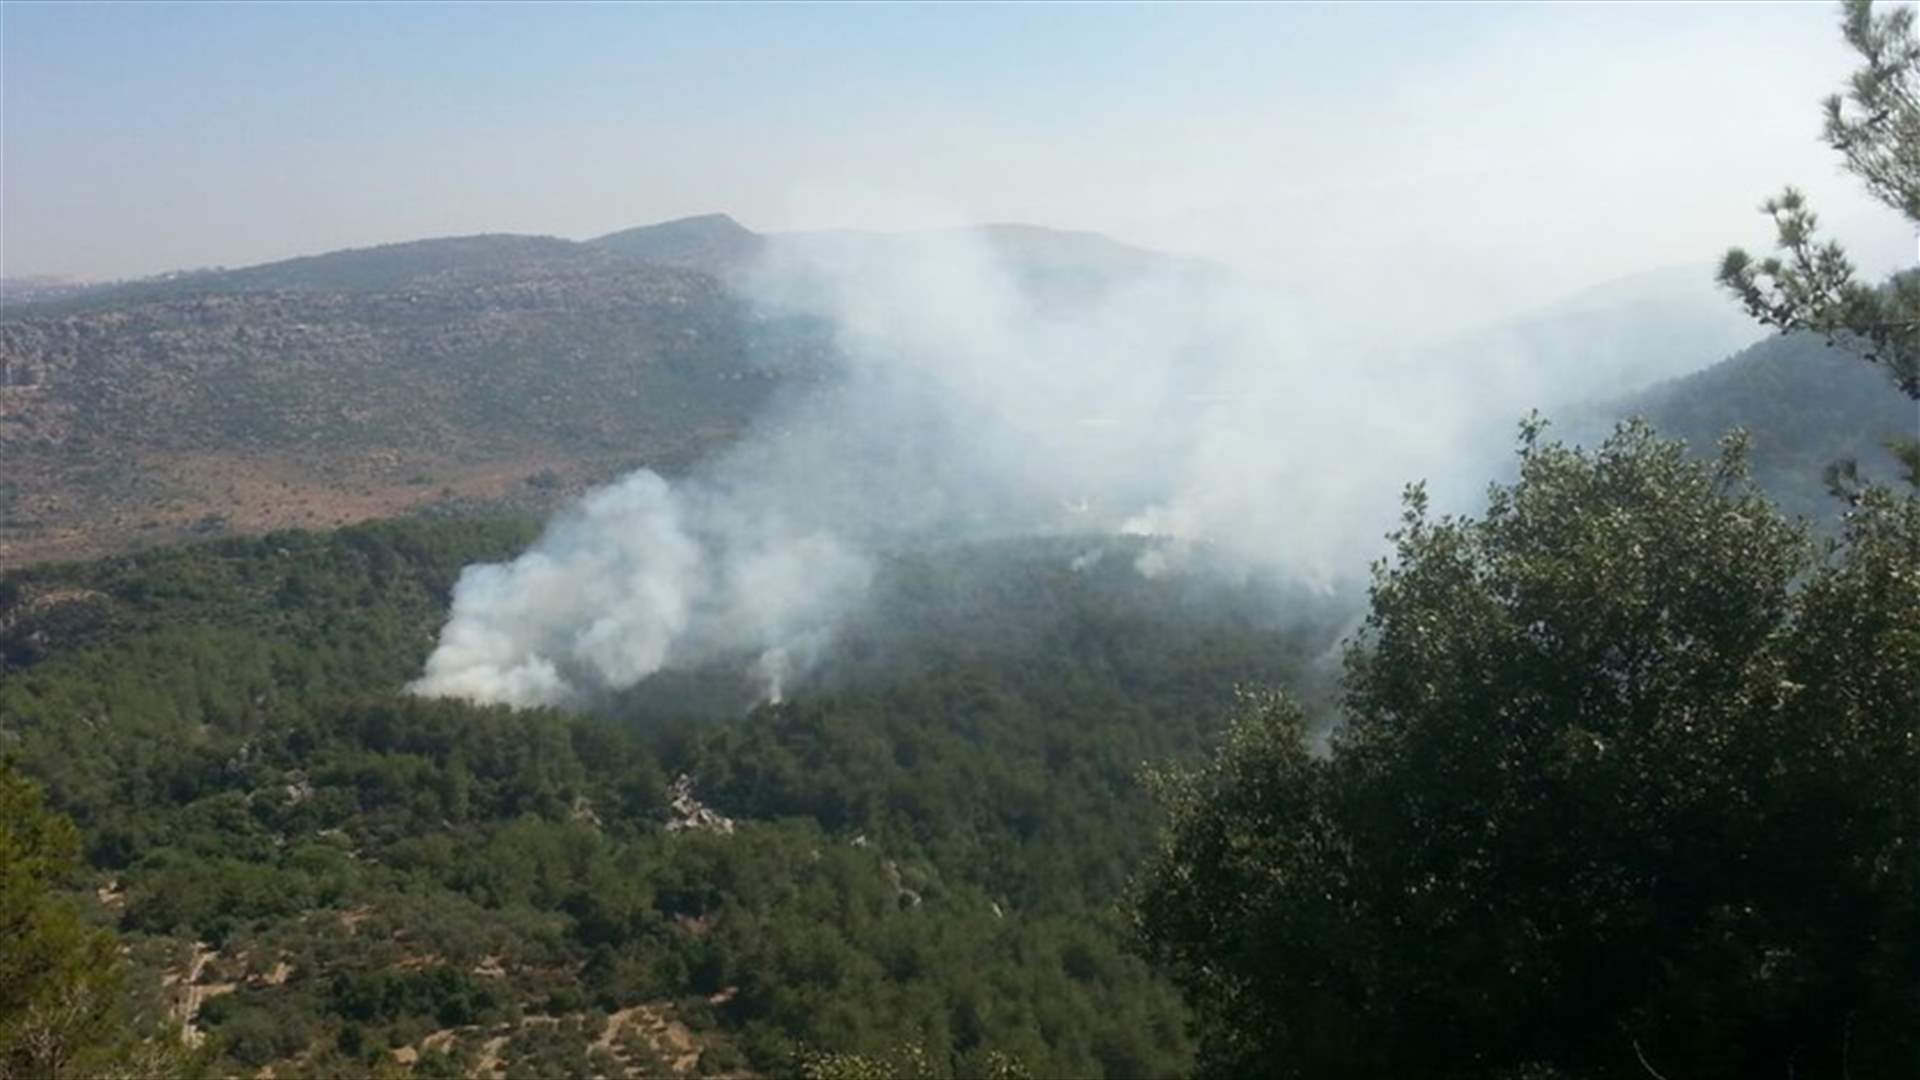 [PHOTOS] Massive fire in Jezzine rages out of control